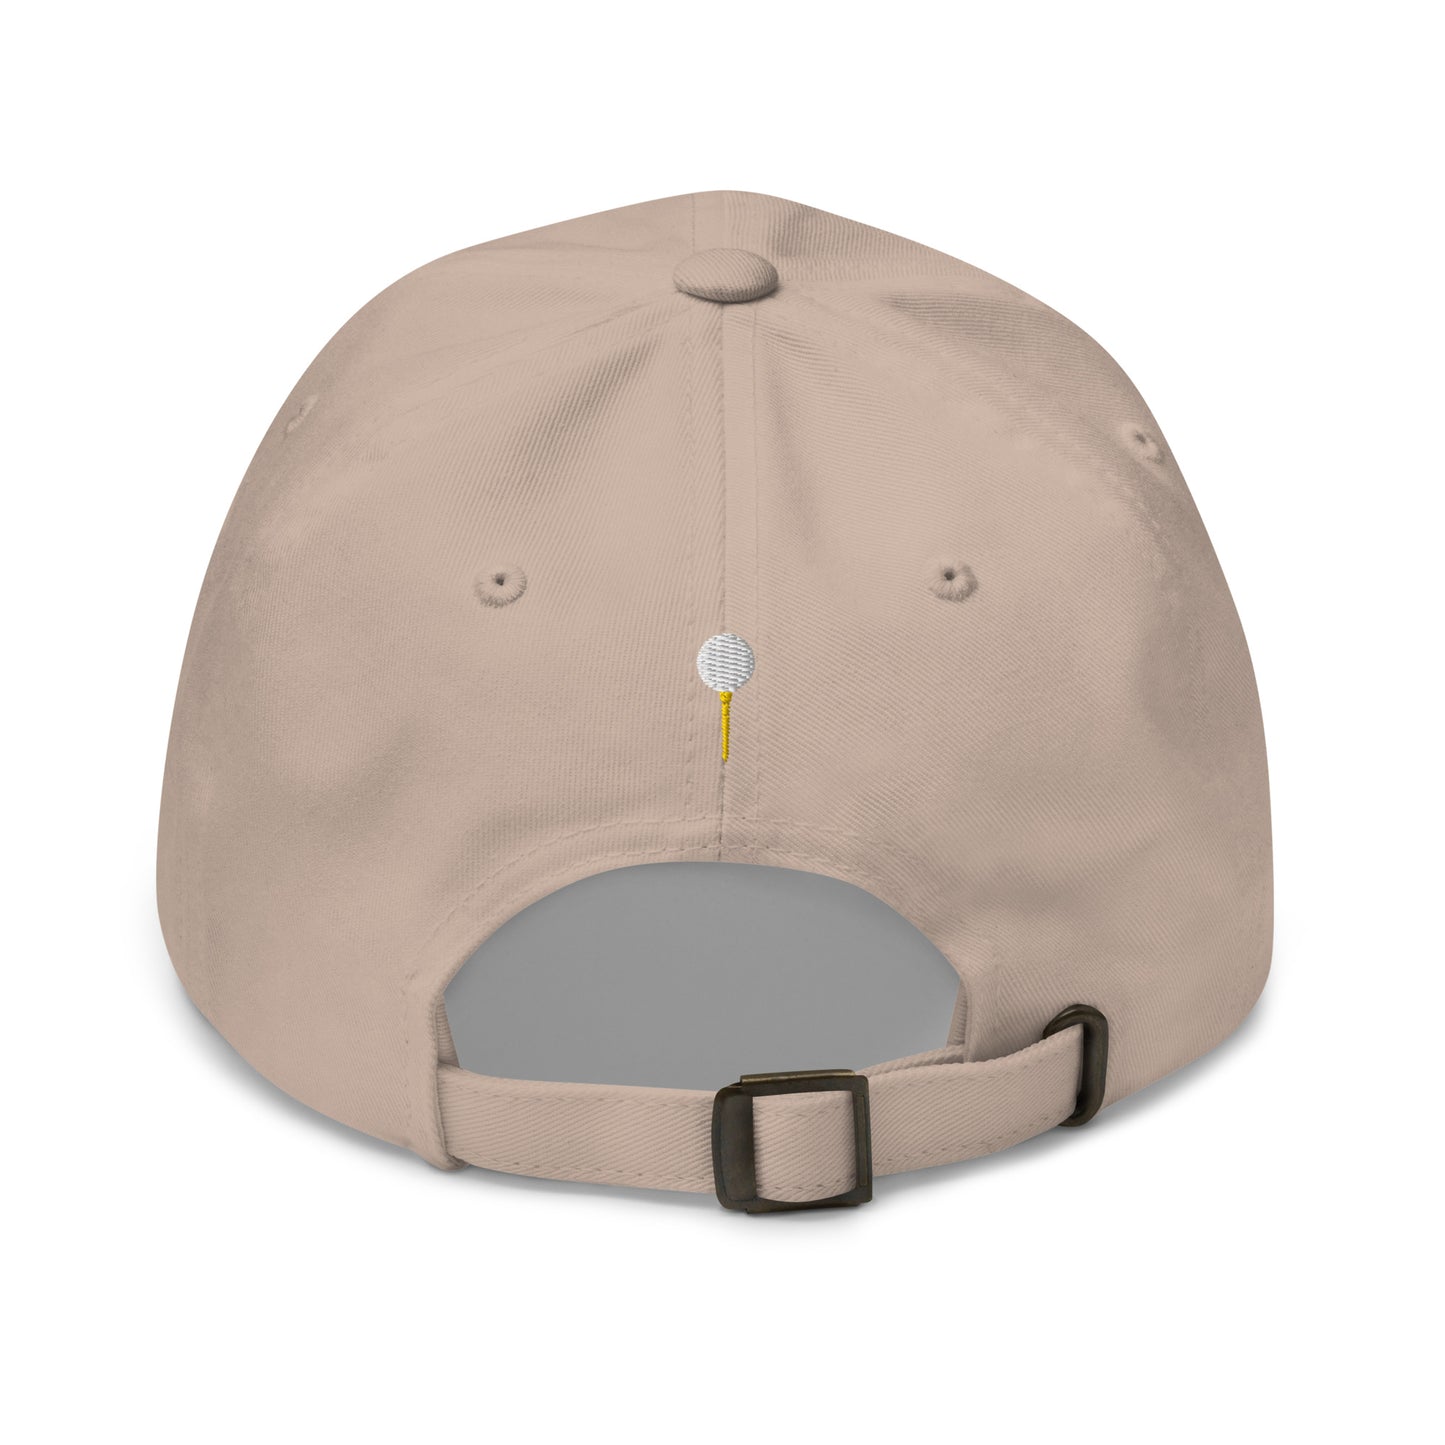 THE "WHO'S YOUR CADDIE?" DAD HAT